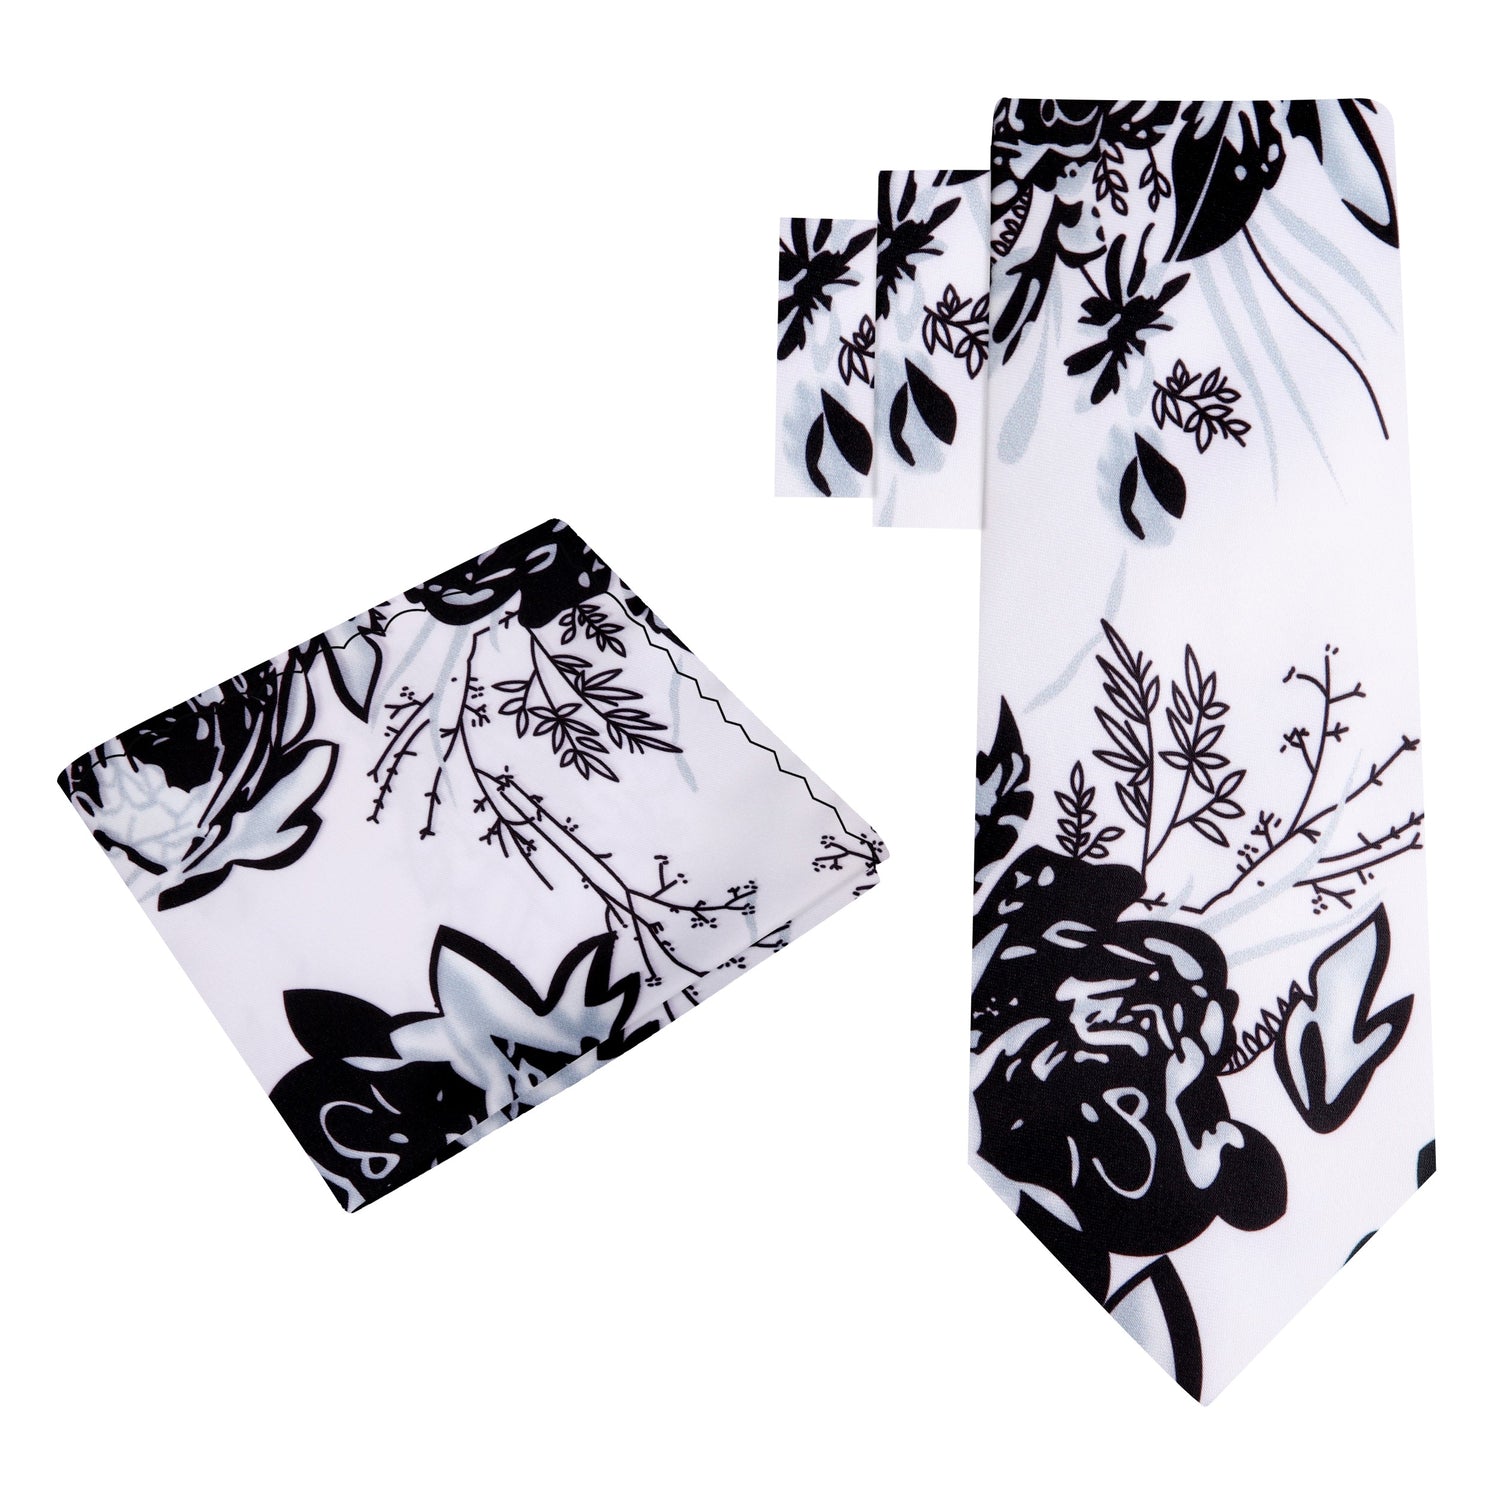 Alt View: White with Black Sketched Flowers Tie and Pocket Square